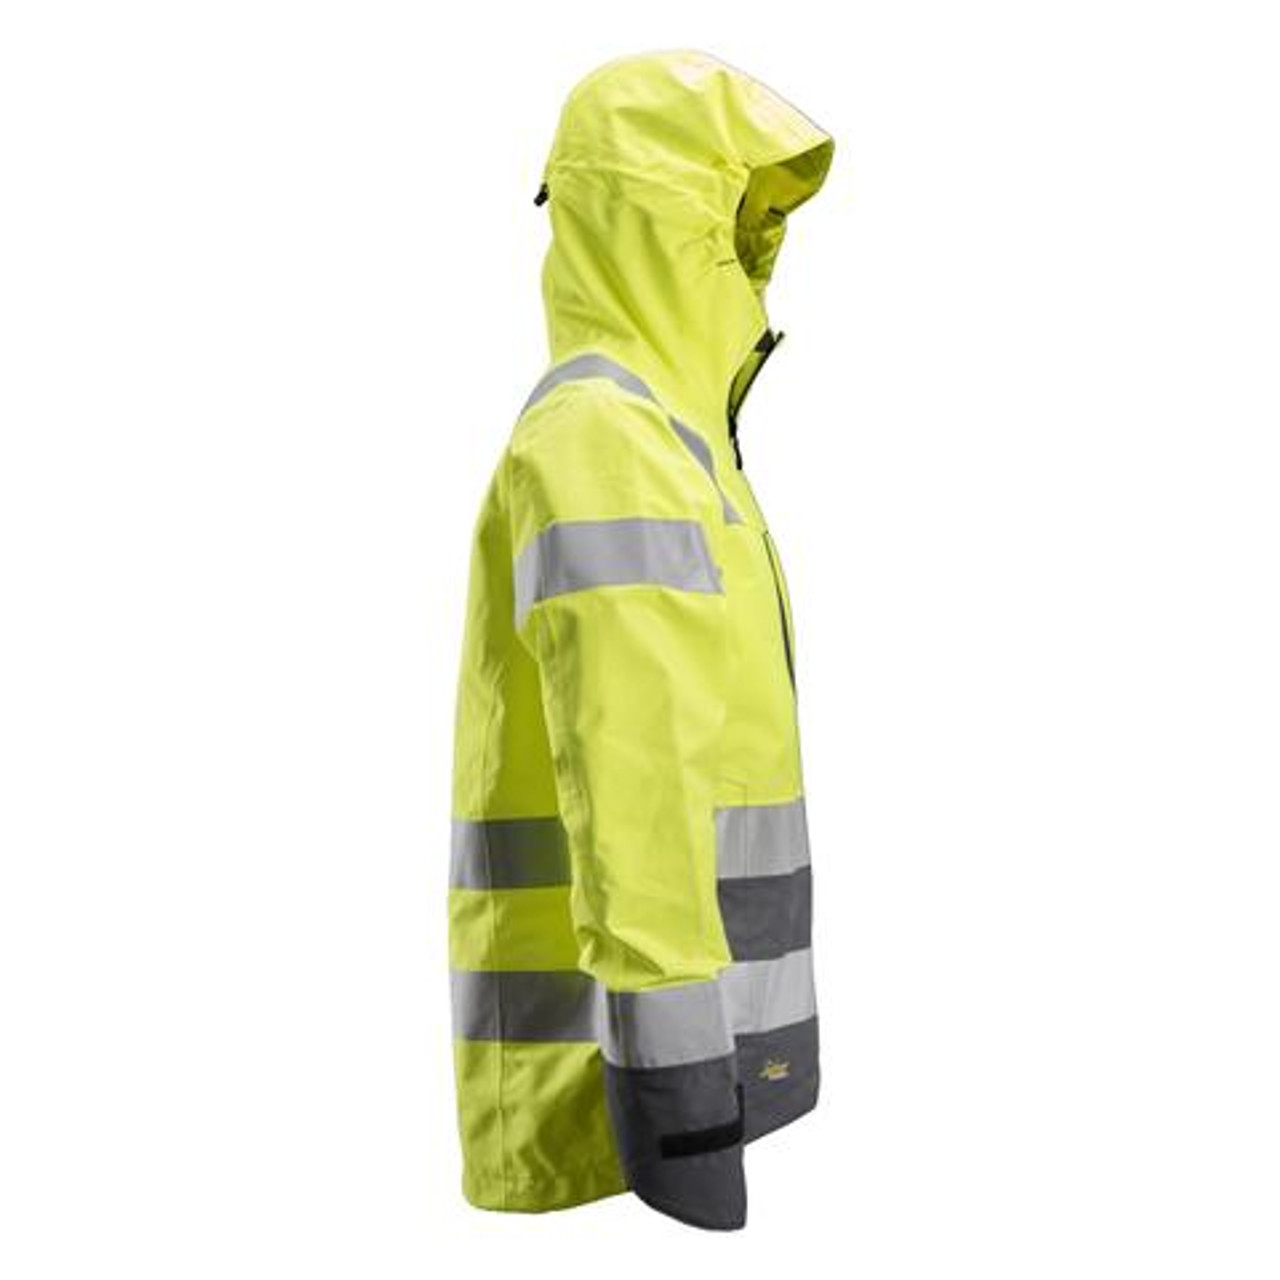 SNICKERS Jacket  1132 with  for Electricians that have Reflective Tape  available in Australia and New Zealand